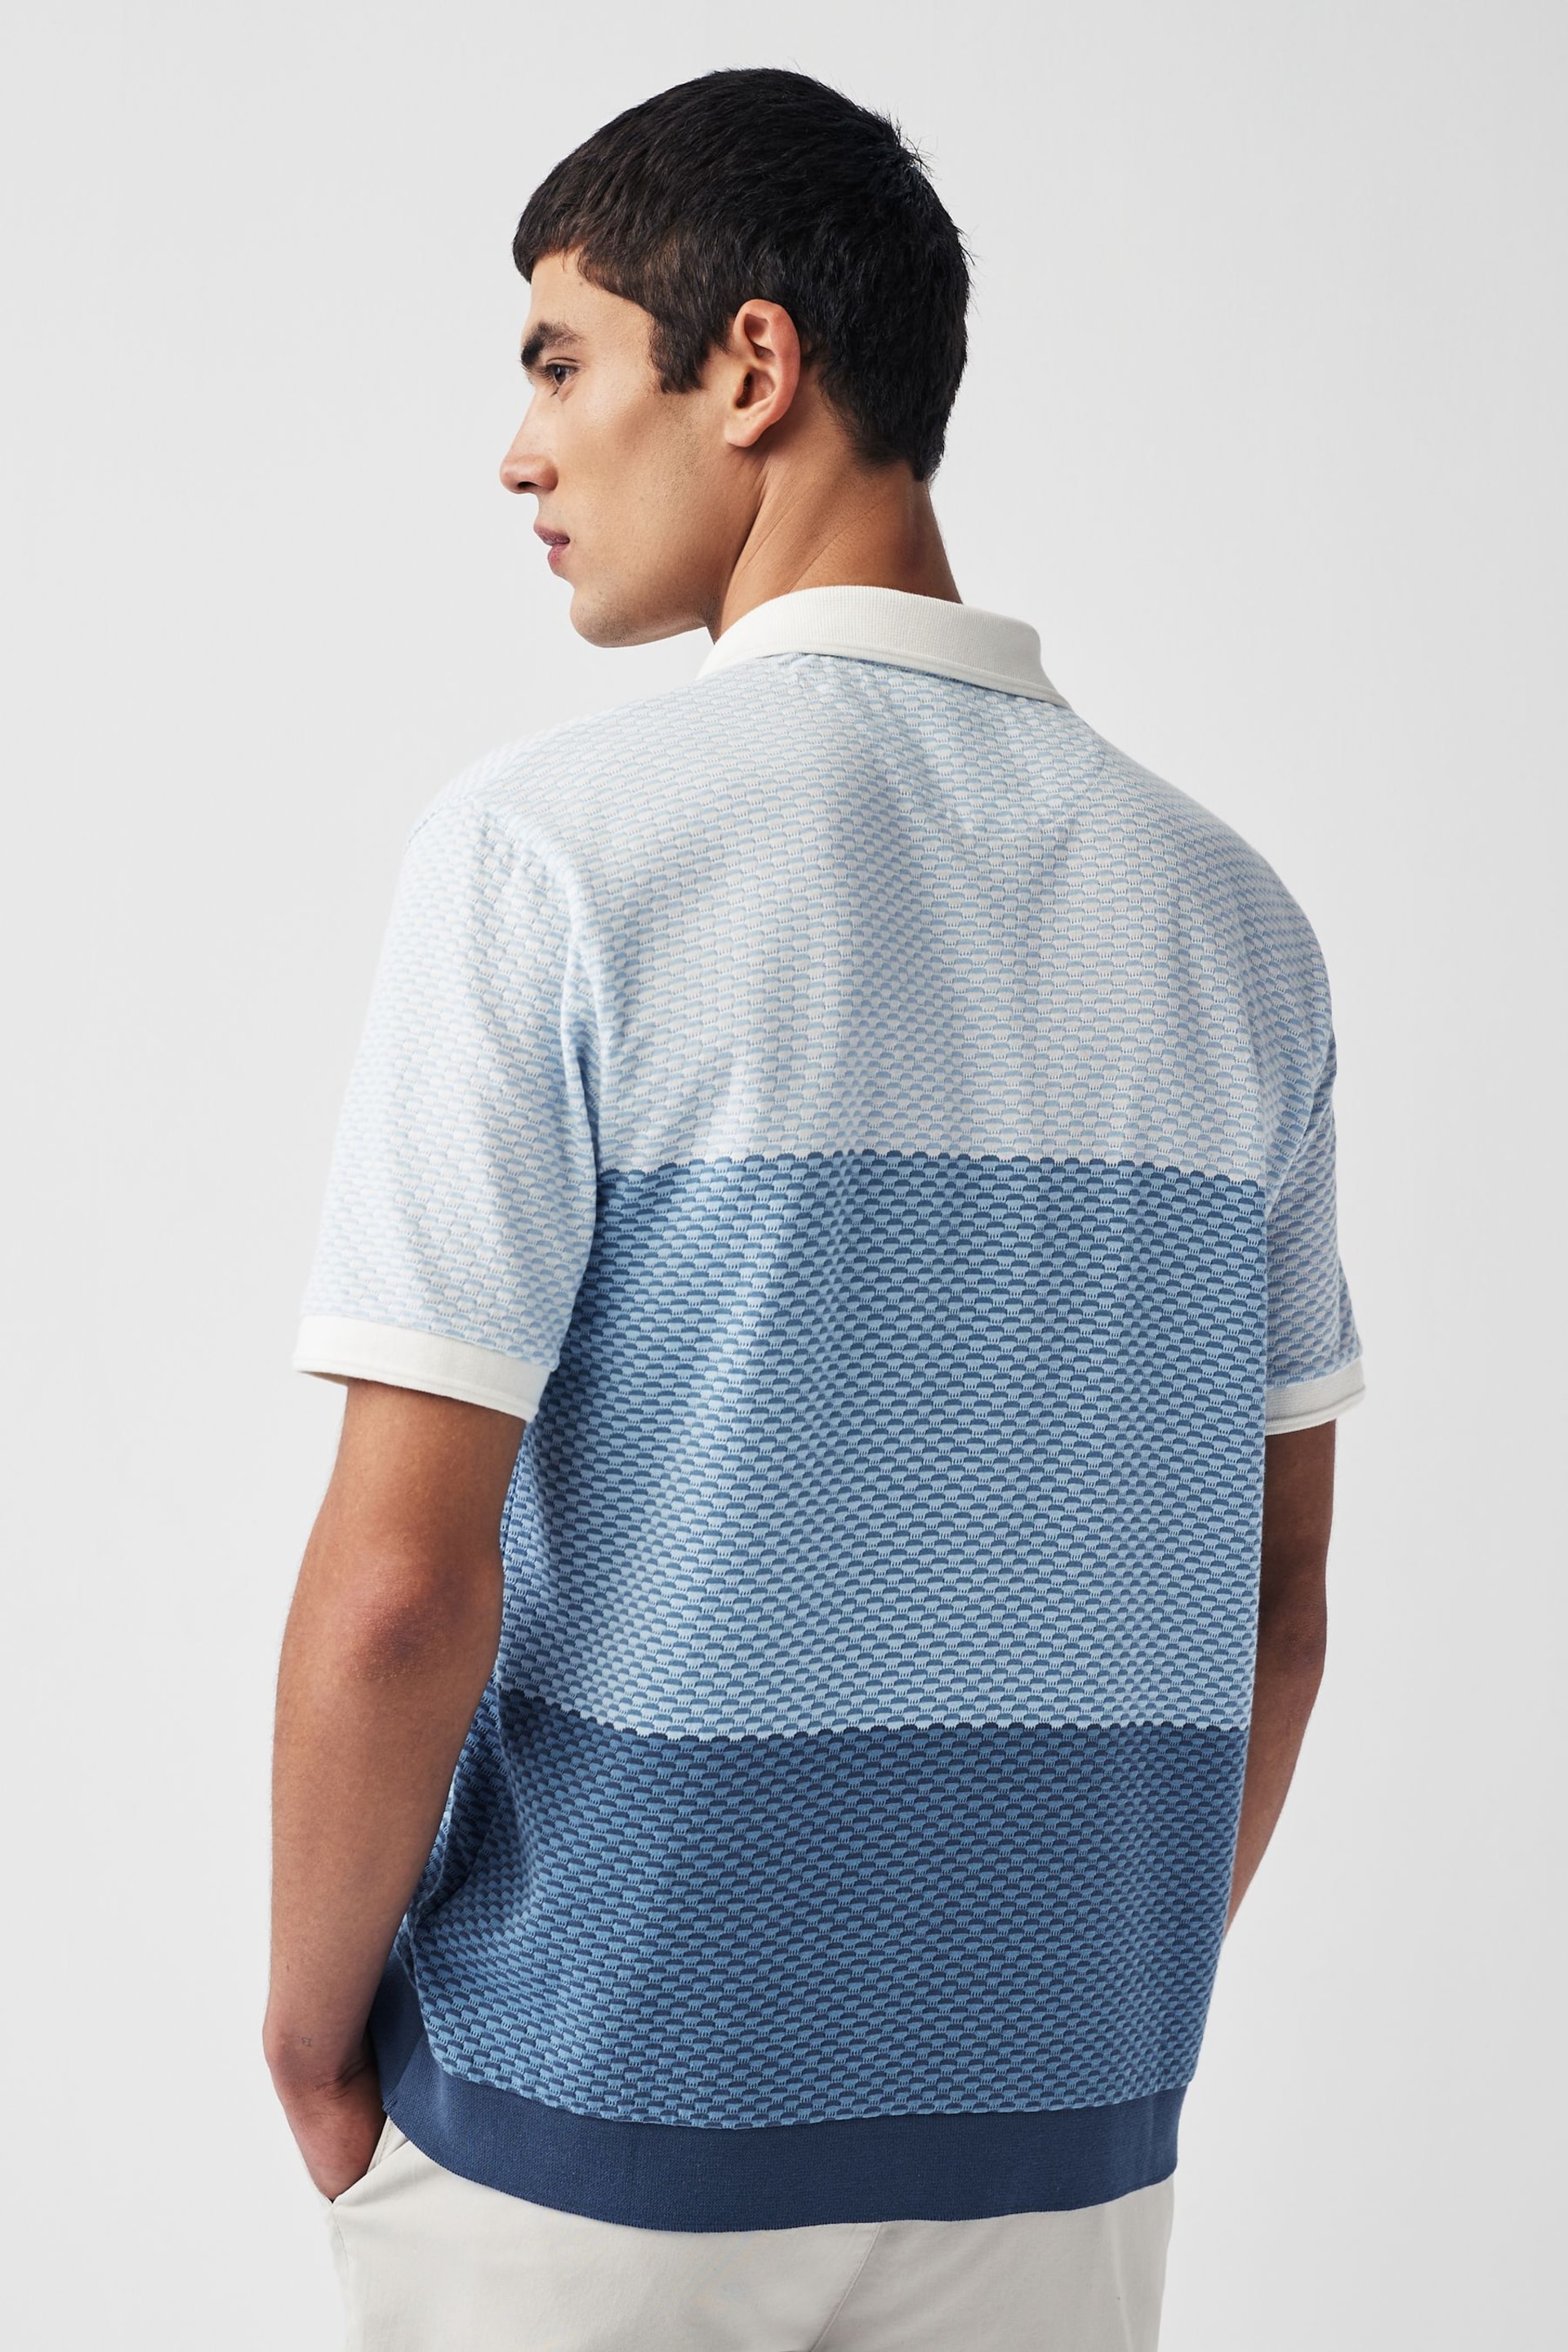 Blue Textured Colour Block Polo Shirt - Image 2 of 7